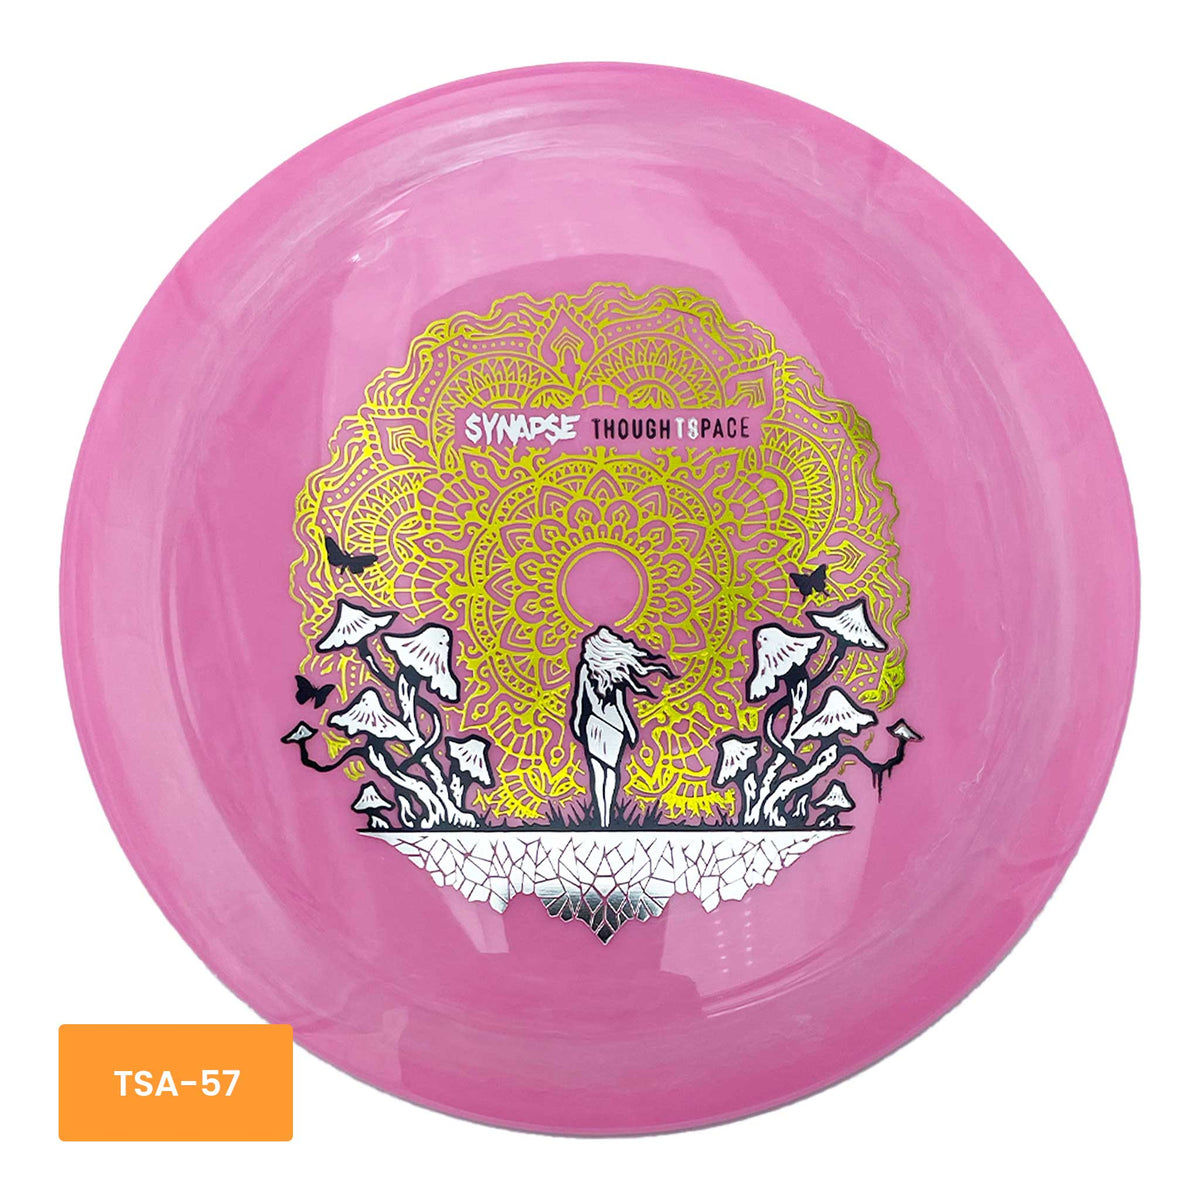 Thought Space Athletics Aura Synapse driver - Pink / Gold